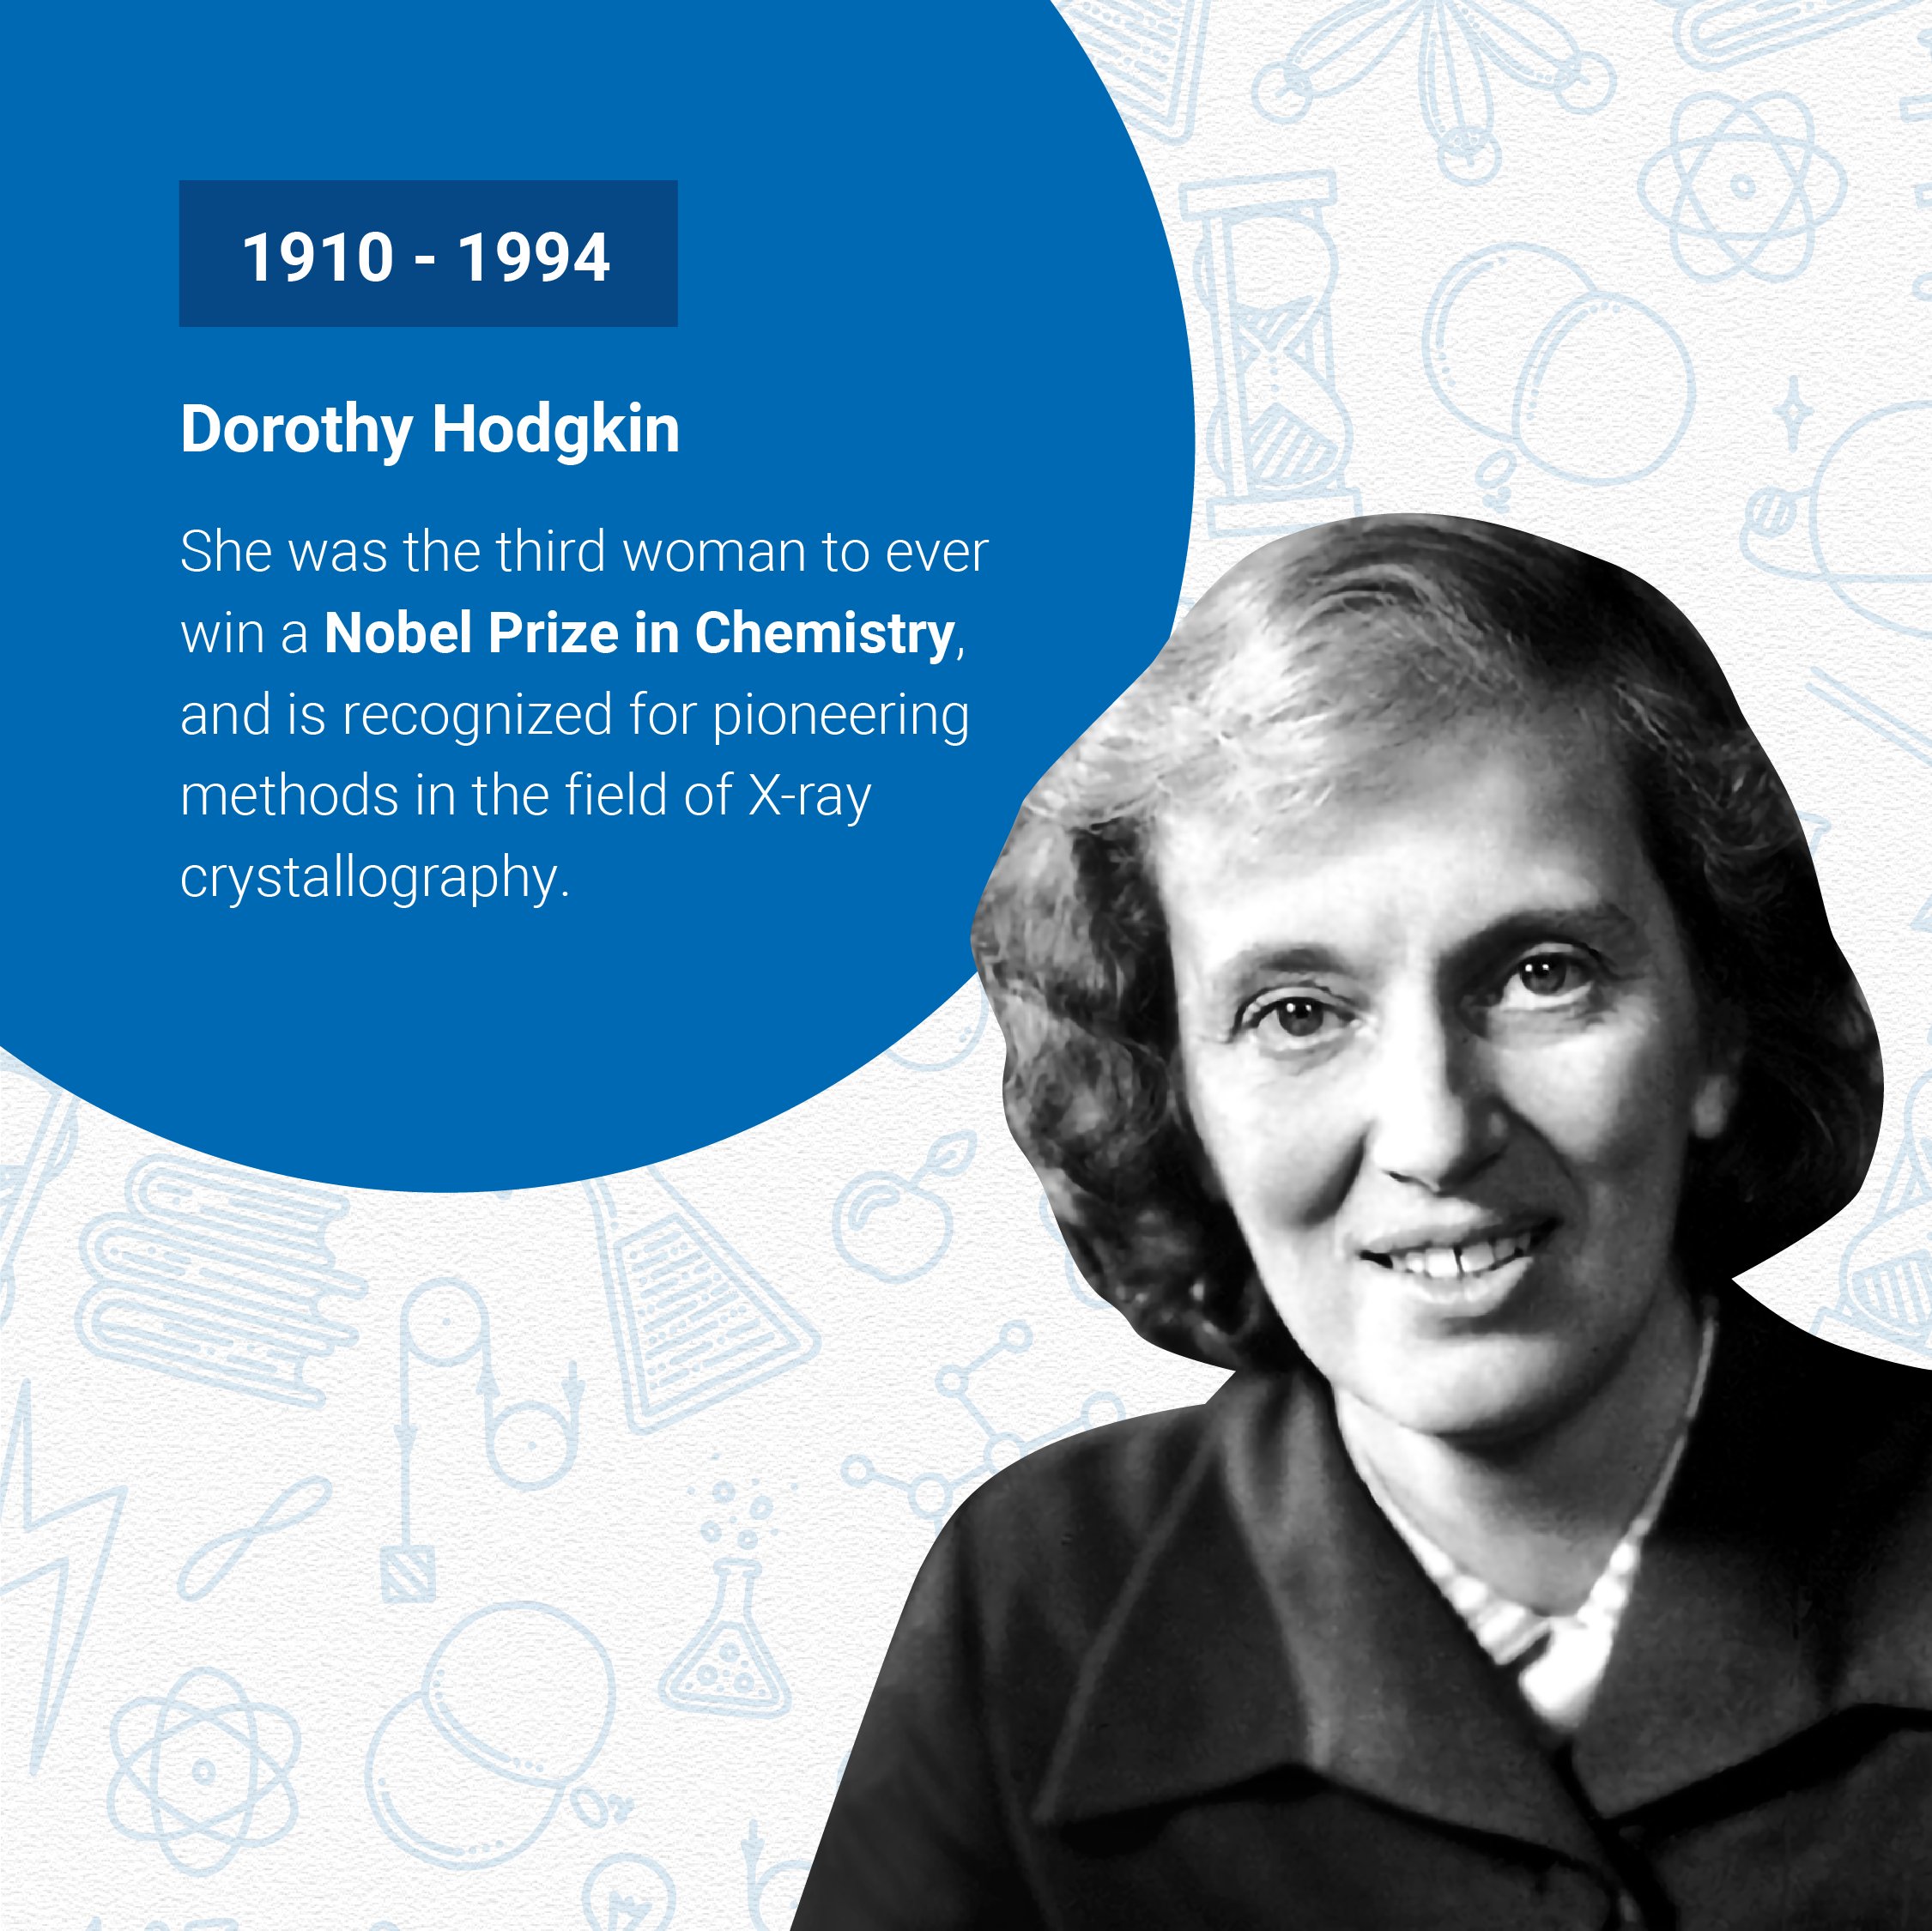 IAEA - International Atomic Energy Agency ⚛️ on Twitter: "Today we celebrate the 3rd woman to ever win the @NobelPrize in Chemistry: Dorothy Hodgkin! She is most well-known for pioneering methods in